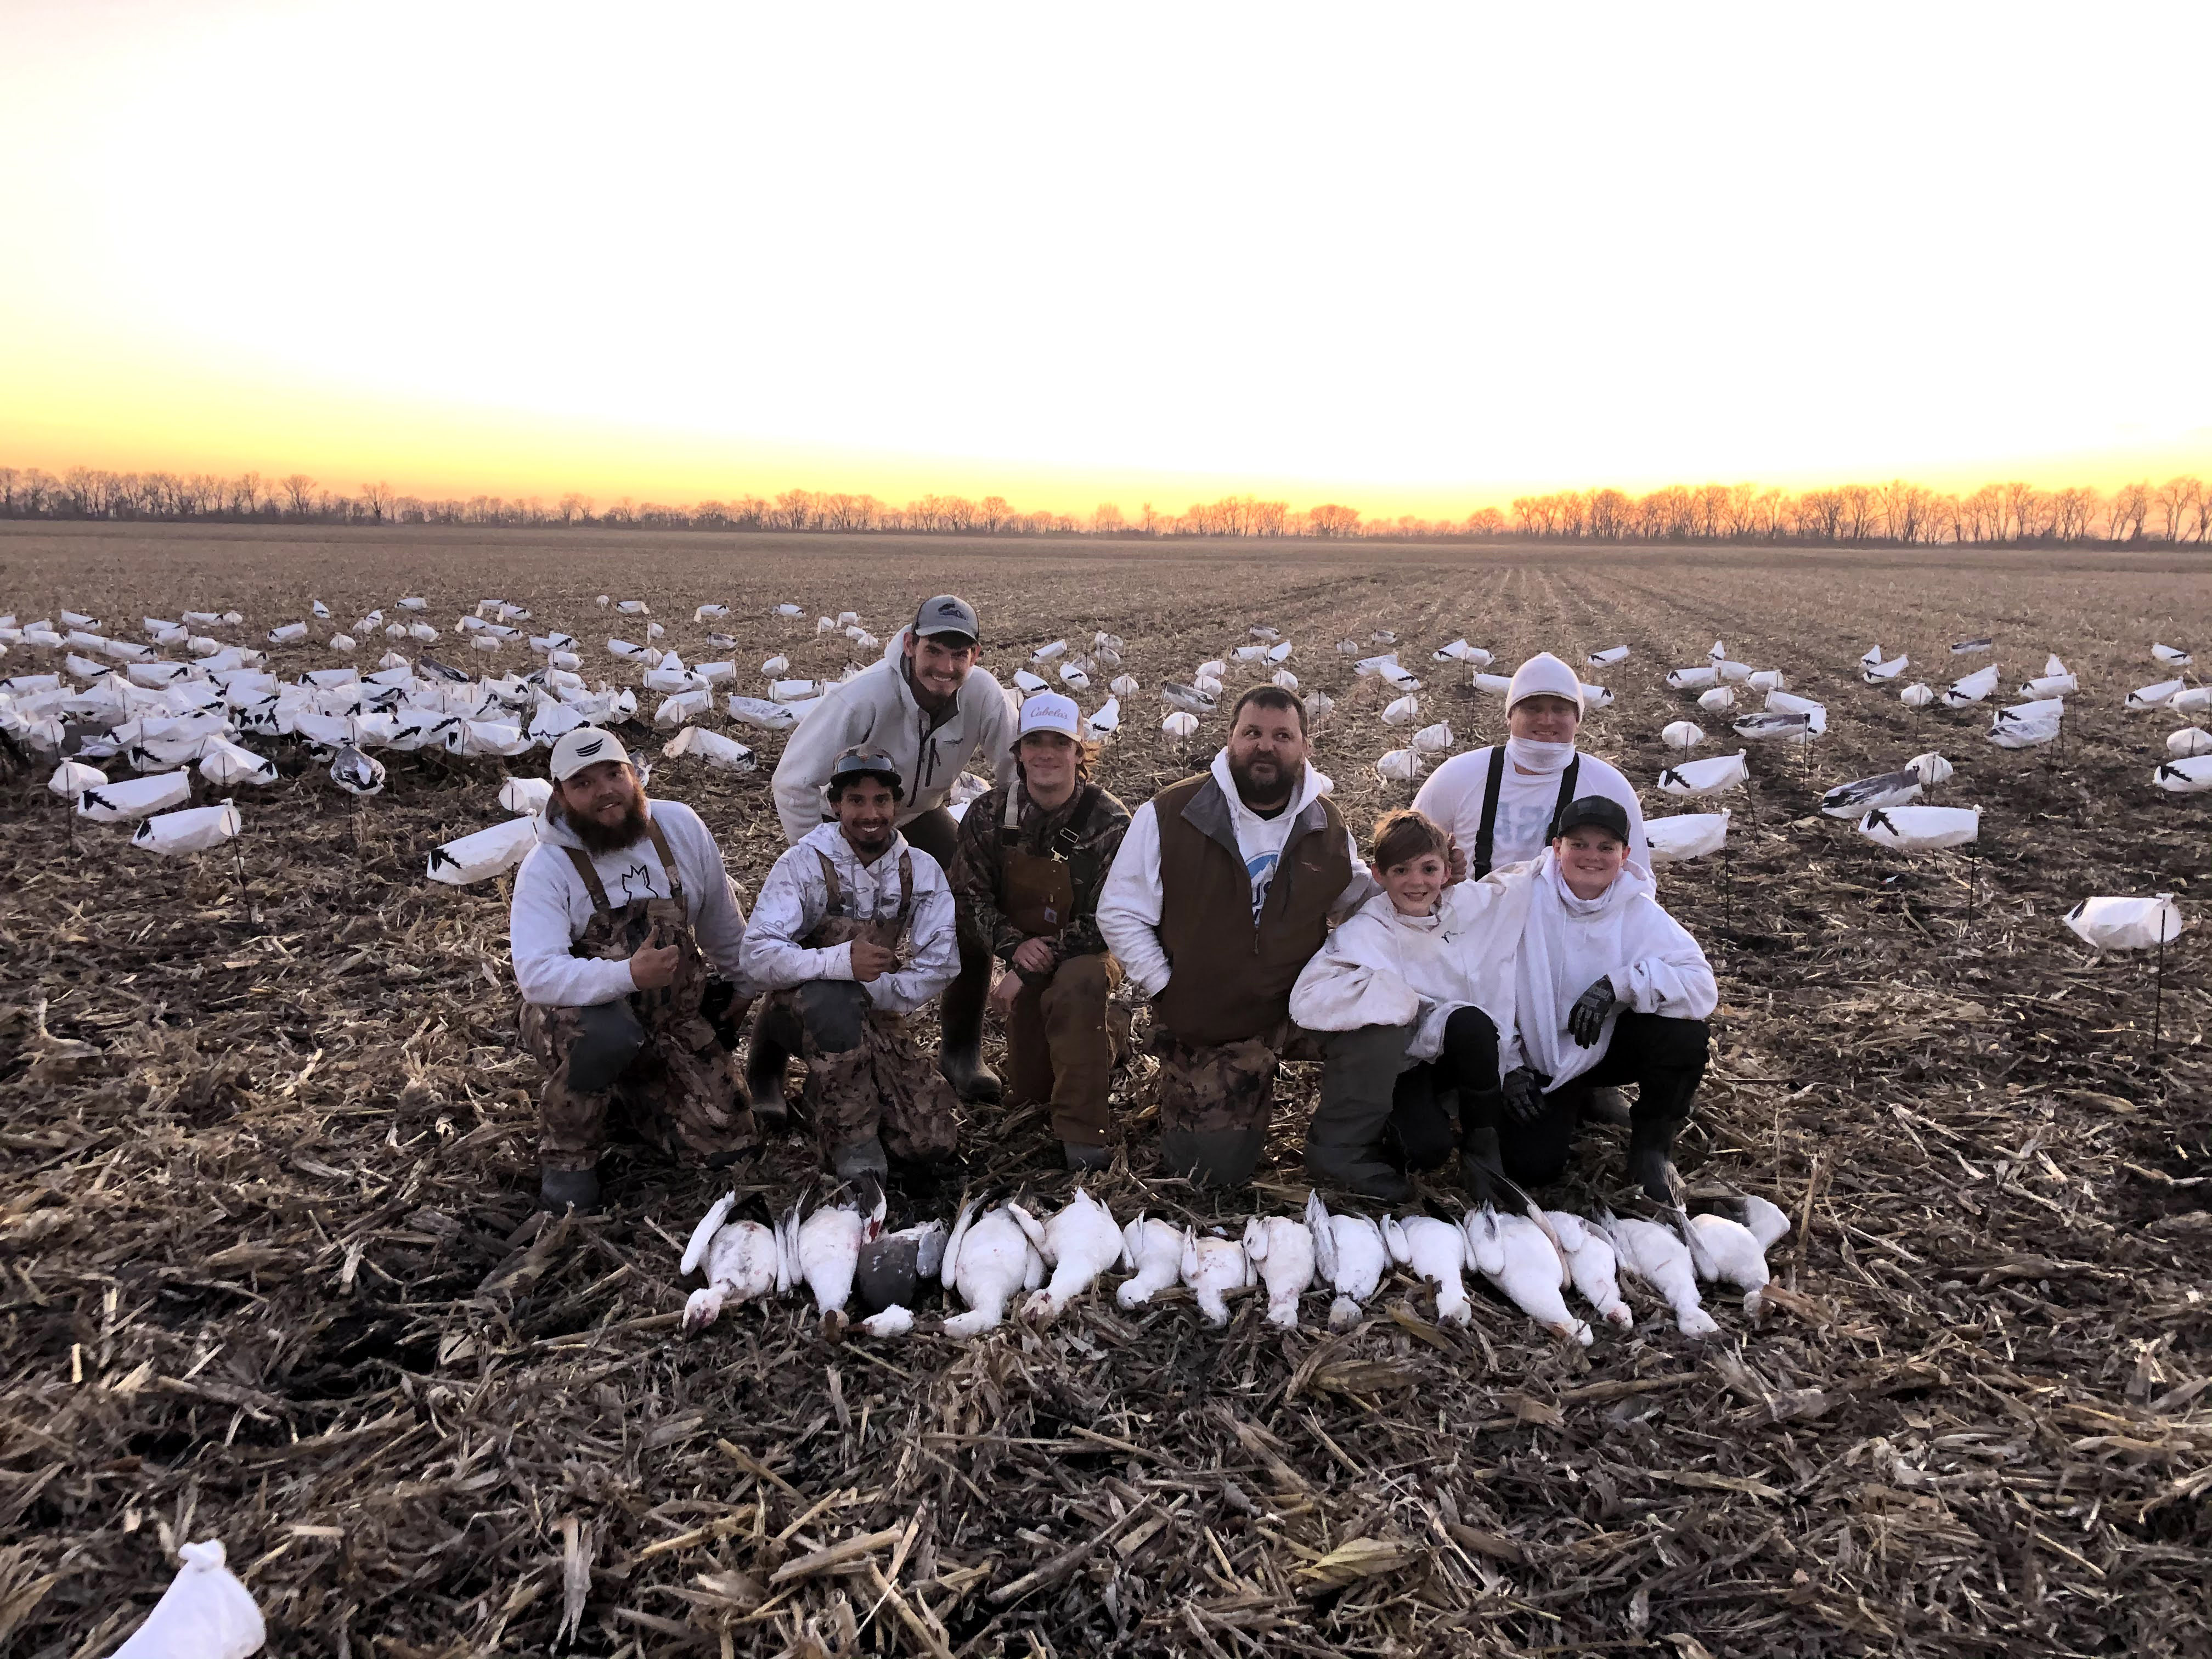 Spring Snow Goose Hunts Whiteout Outfitters 83